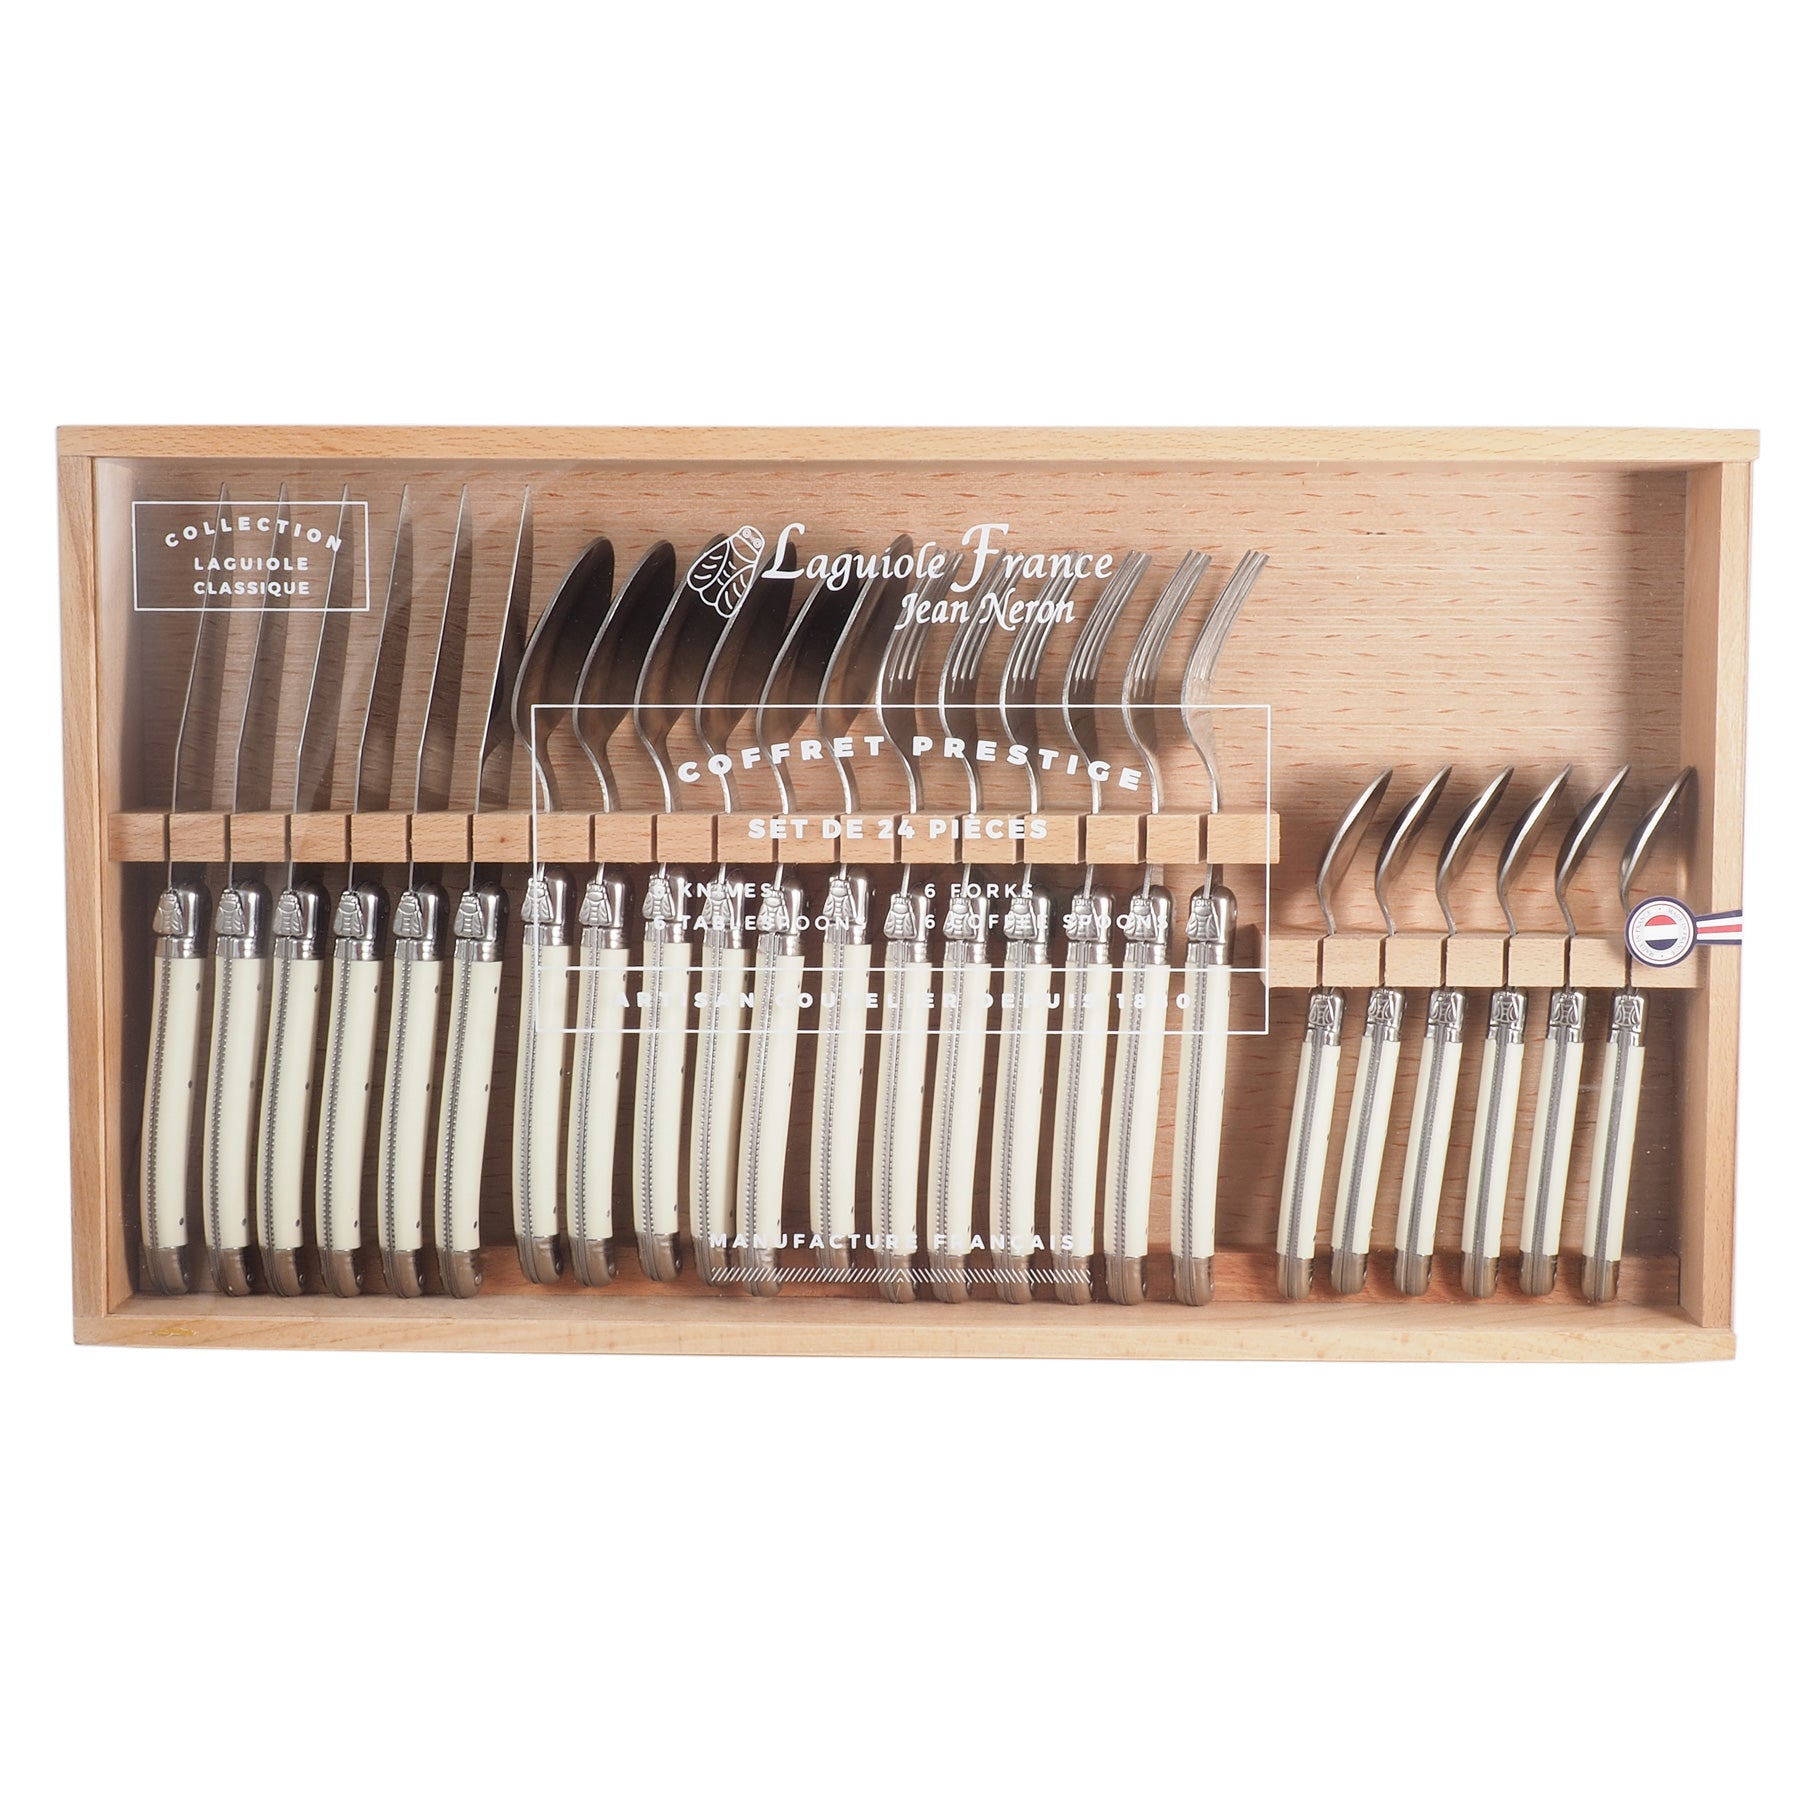 Laguiole Ivory Flatware in Wooden Box with Acrylic Lid (Set of 24) Cutlery Set Laguiole Brand_Laguiole Carving Sets Kitchen_Dinnerware Laguiole 7900-54000_I_AL-Laguiole-Ivory-Flatware-in-Wooden-Box-with-Acrylic-Lid-_Set-of-24